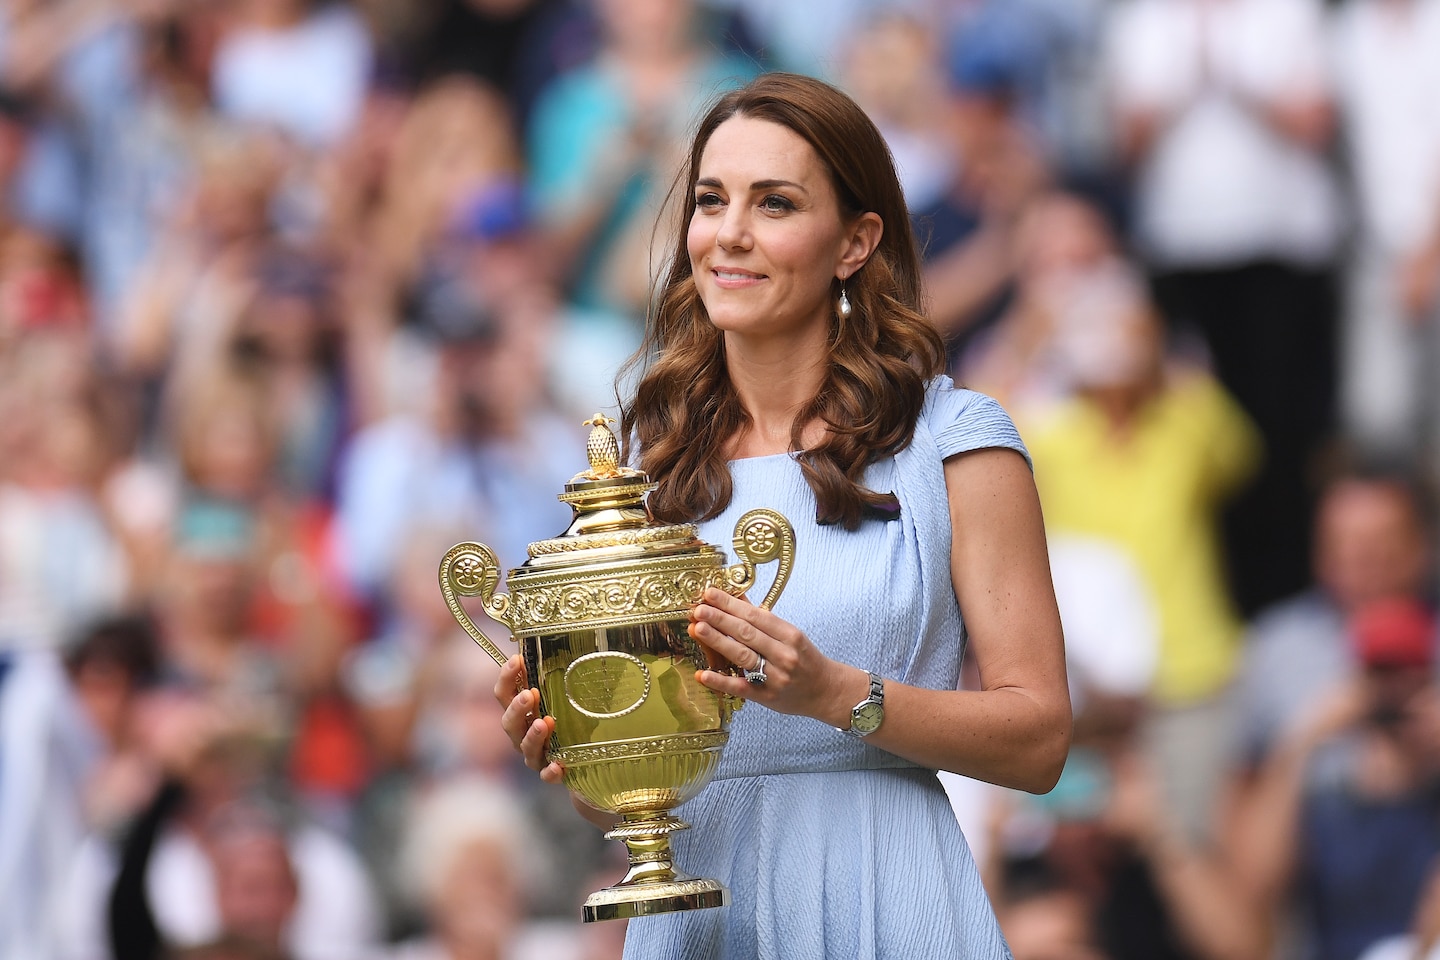 Princess Kate to present trophy at Wimbledon men’s final in rare appearance